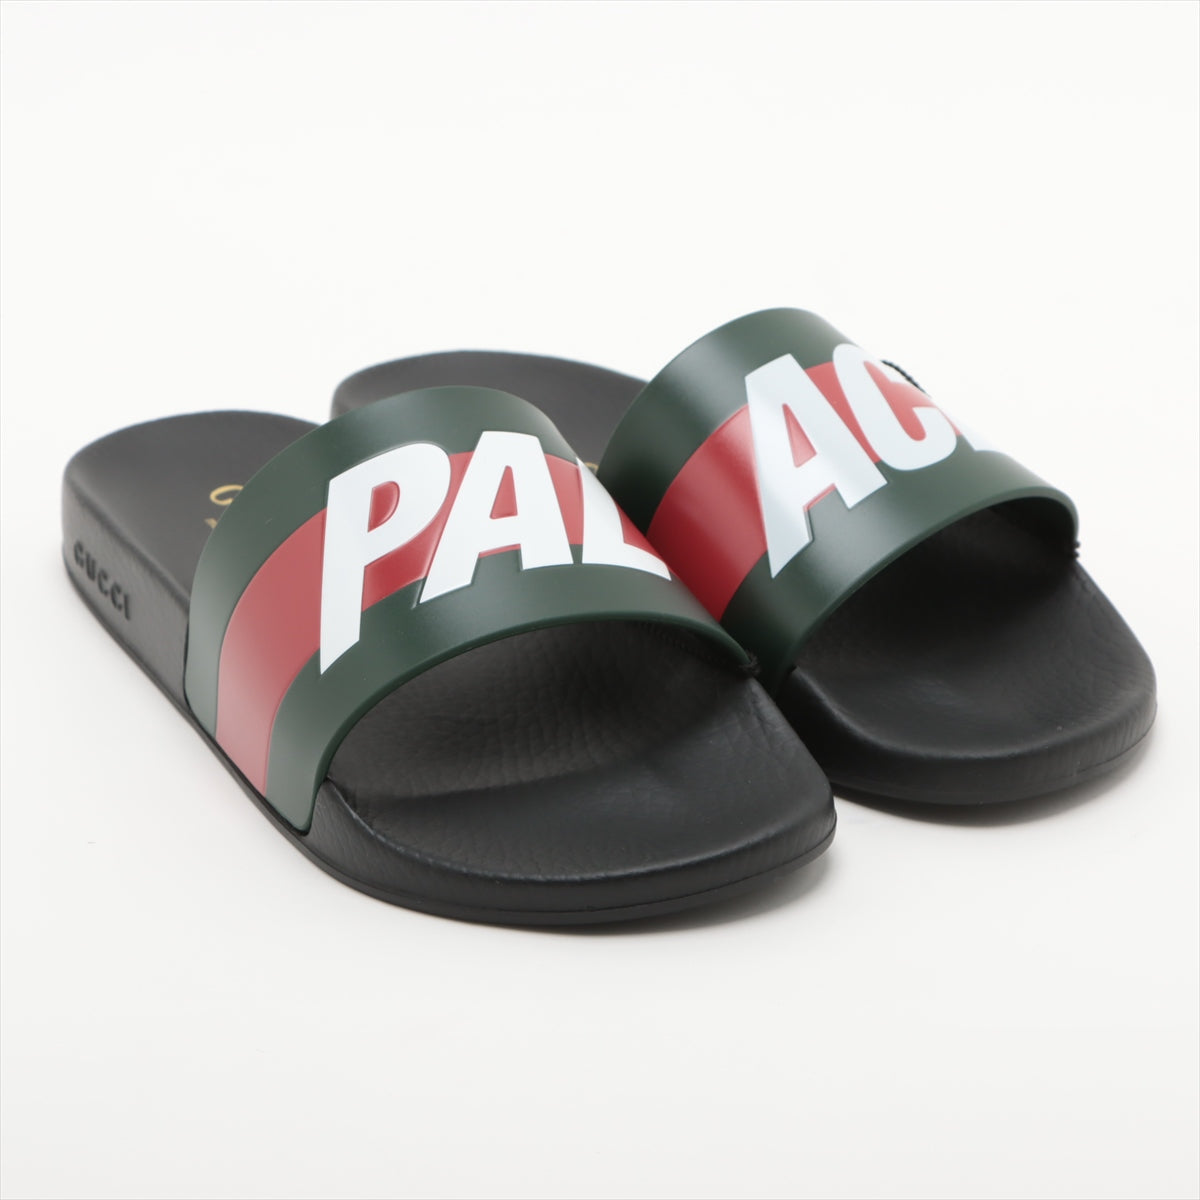 Palace x Gucci Rubber Sandals 8 Men's Multicolor 723353 box There is a storage bag